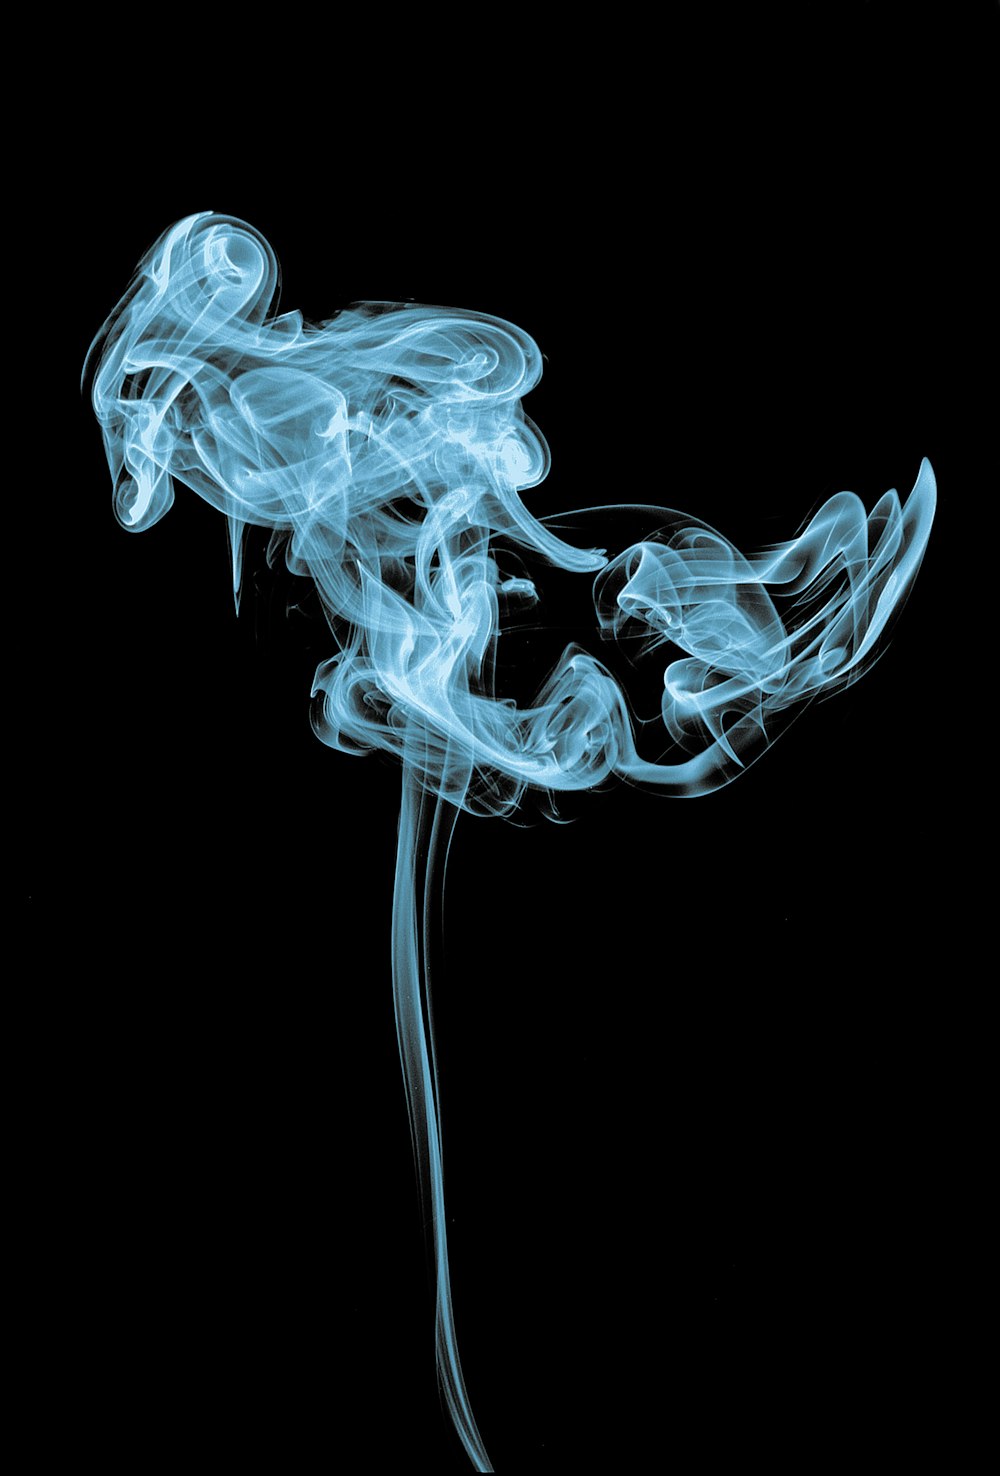 Smoke Effect Pictures | Download Free Images on Unsplash